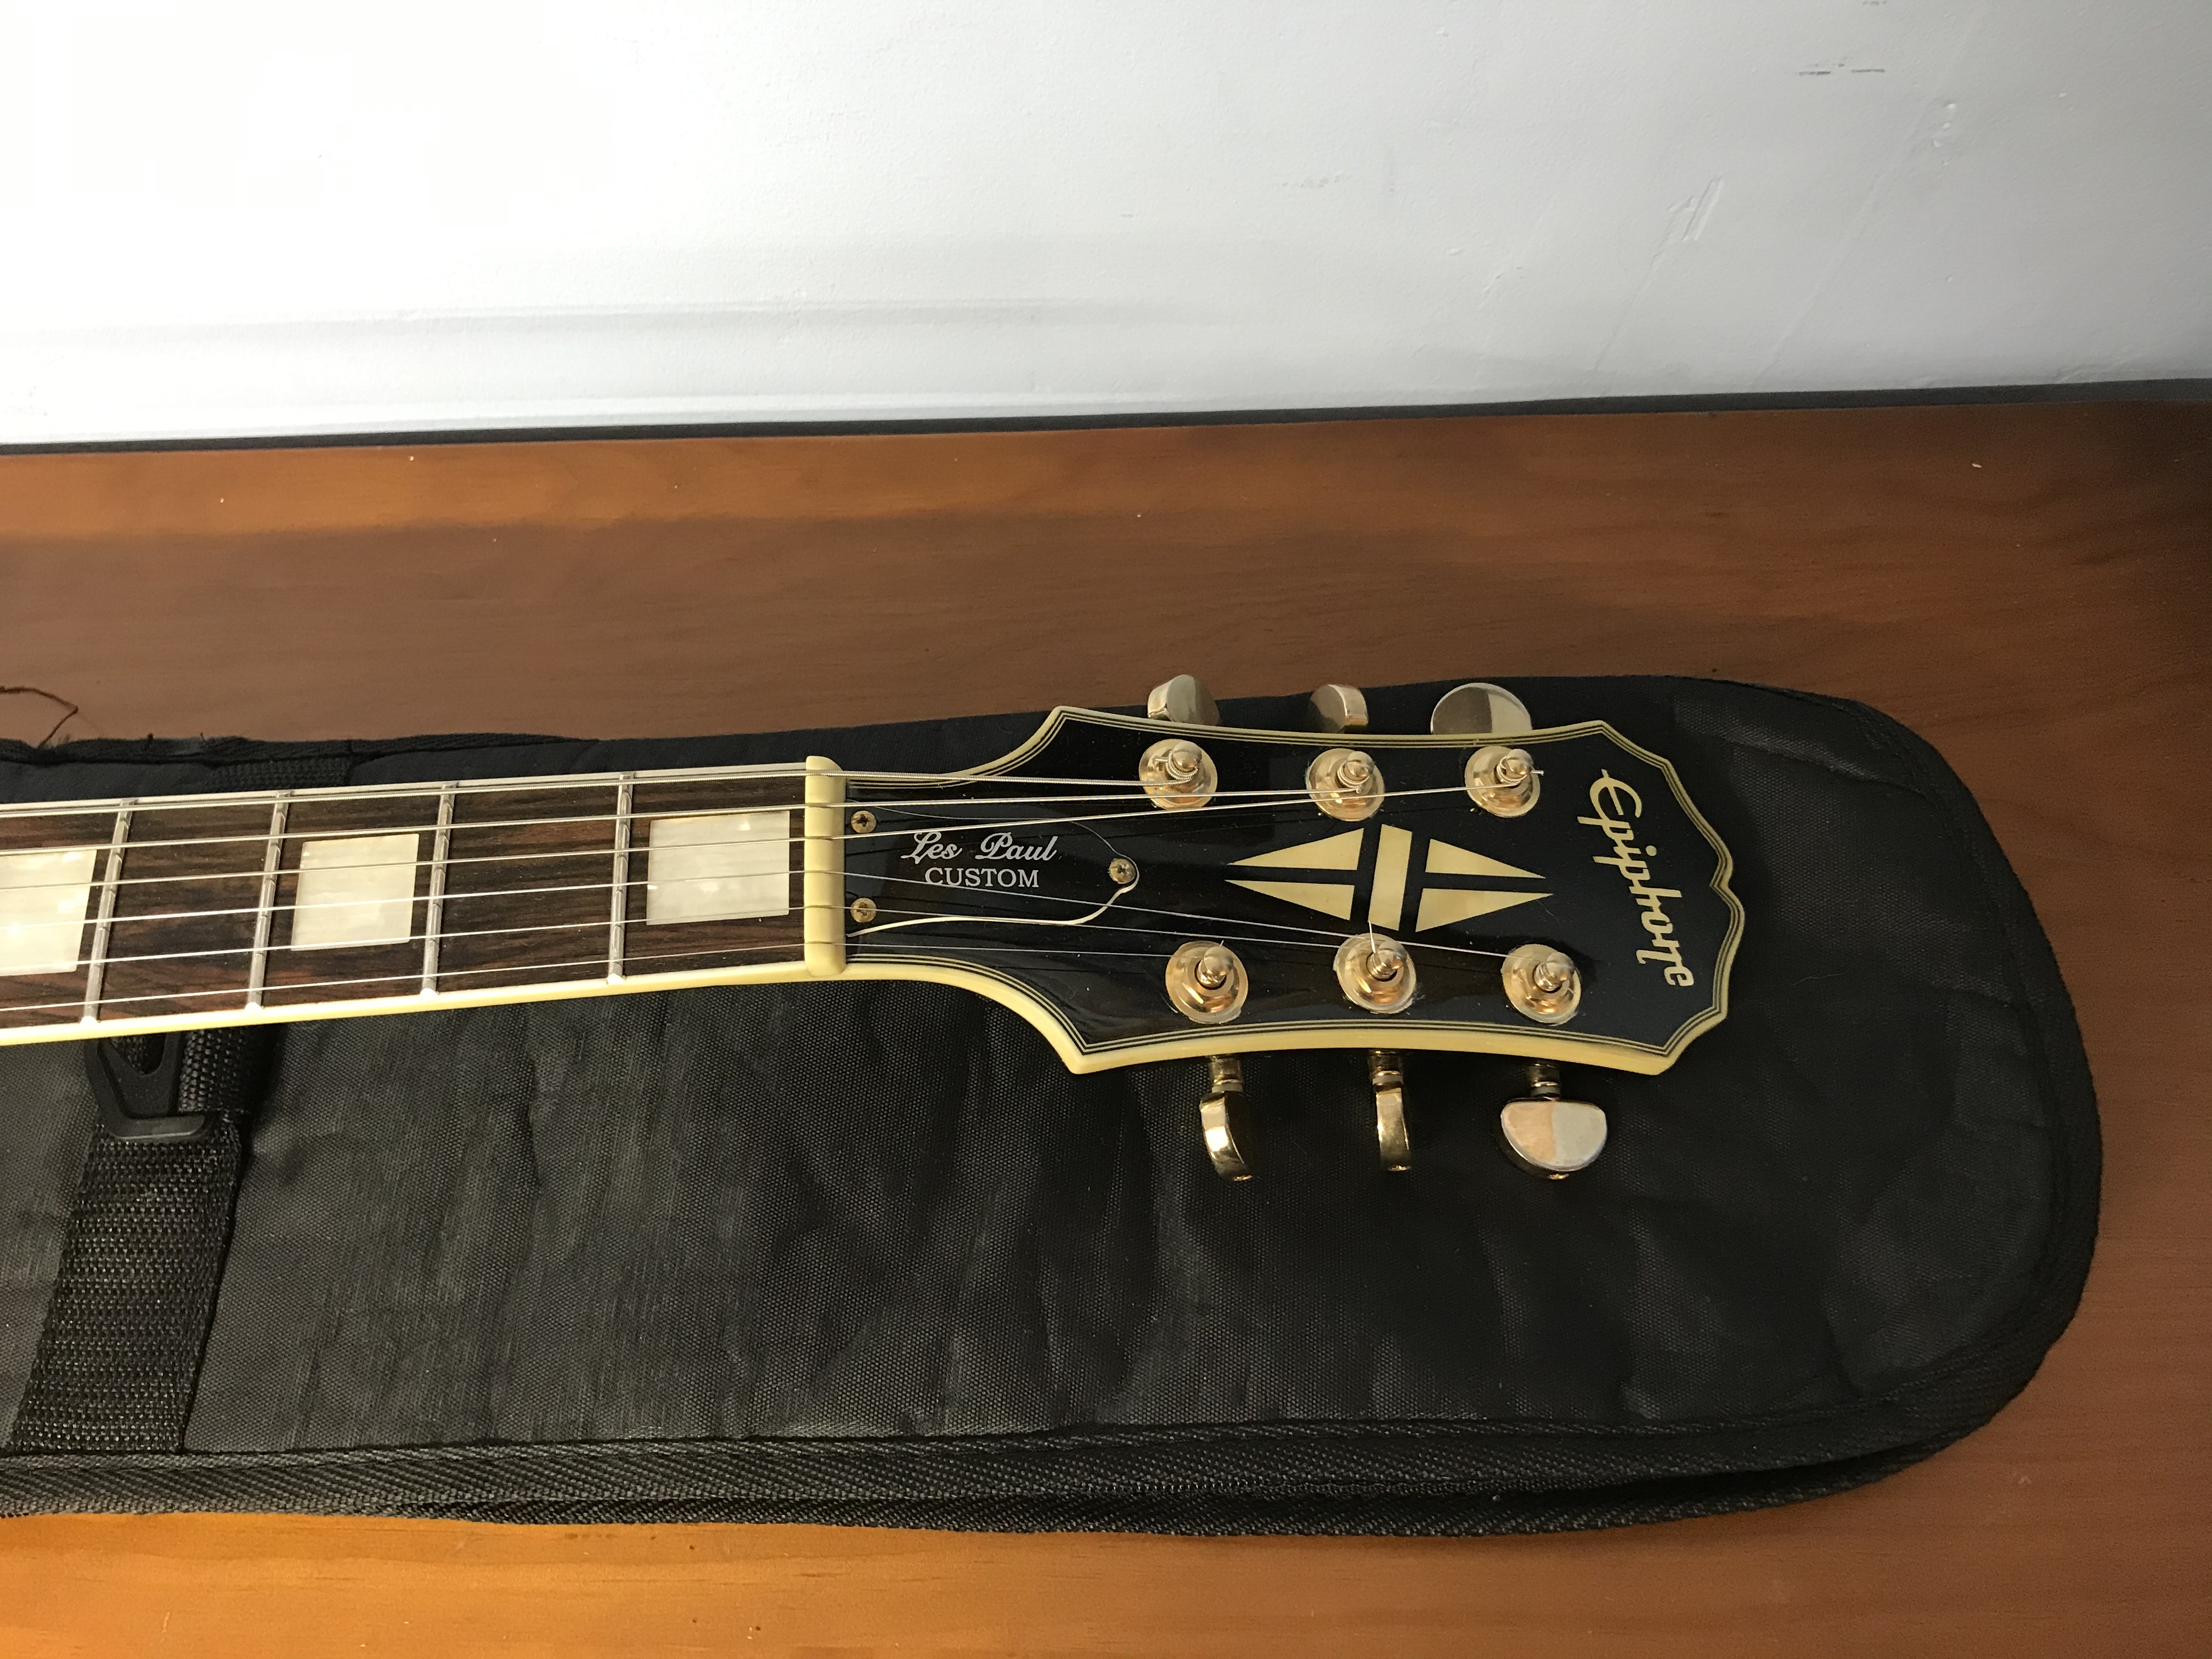 A Les Paul custom style guitar, with soft case - Image 3 of 3